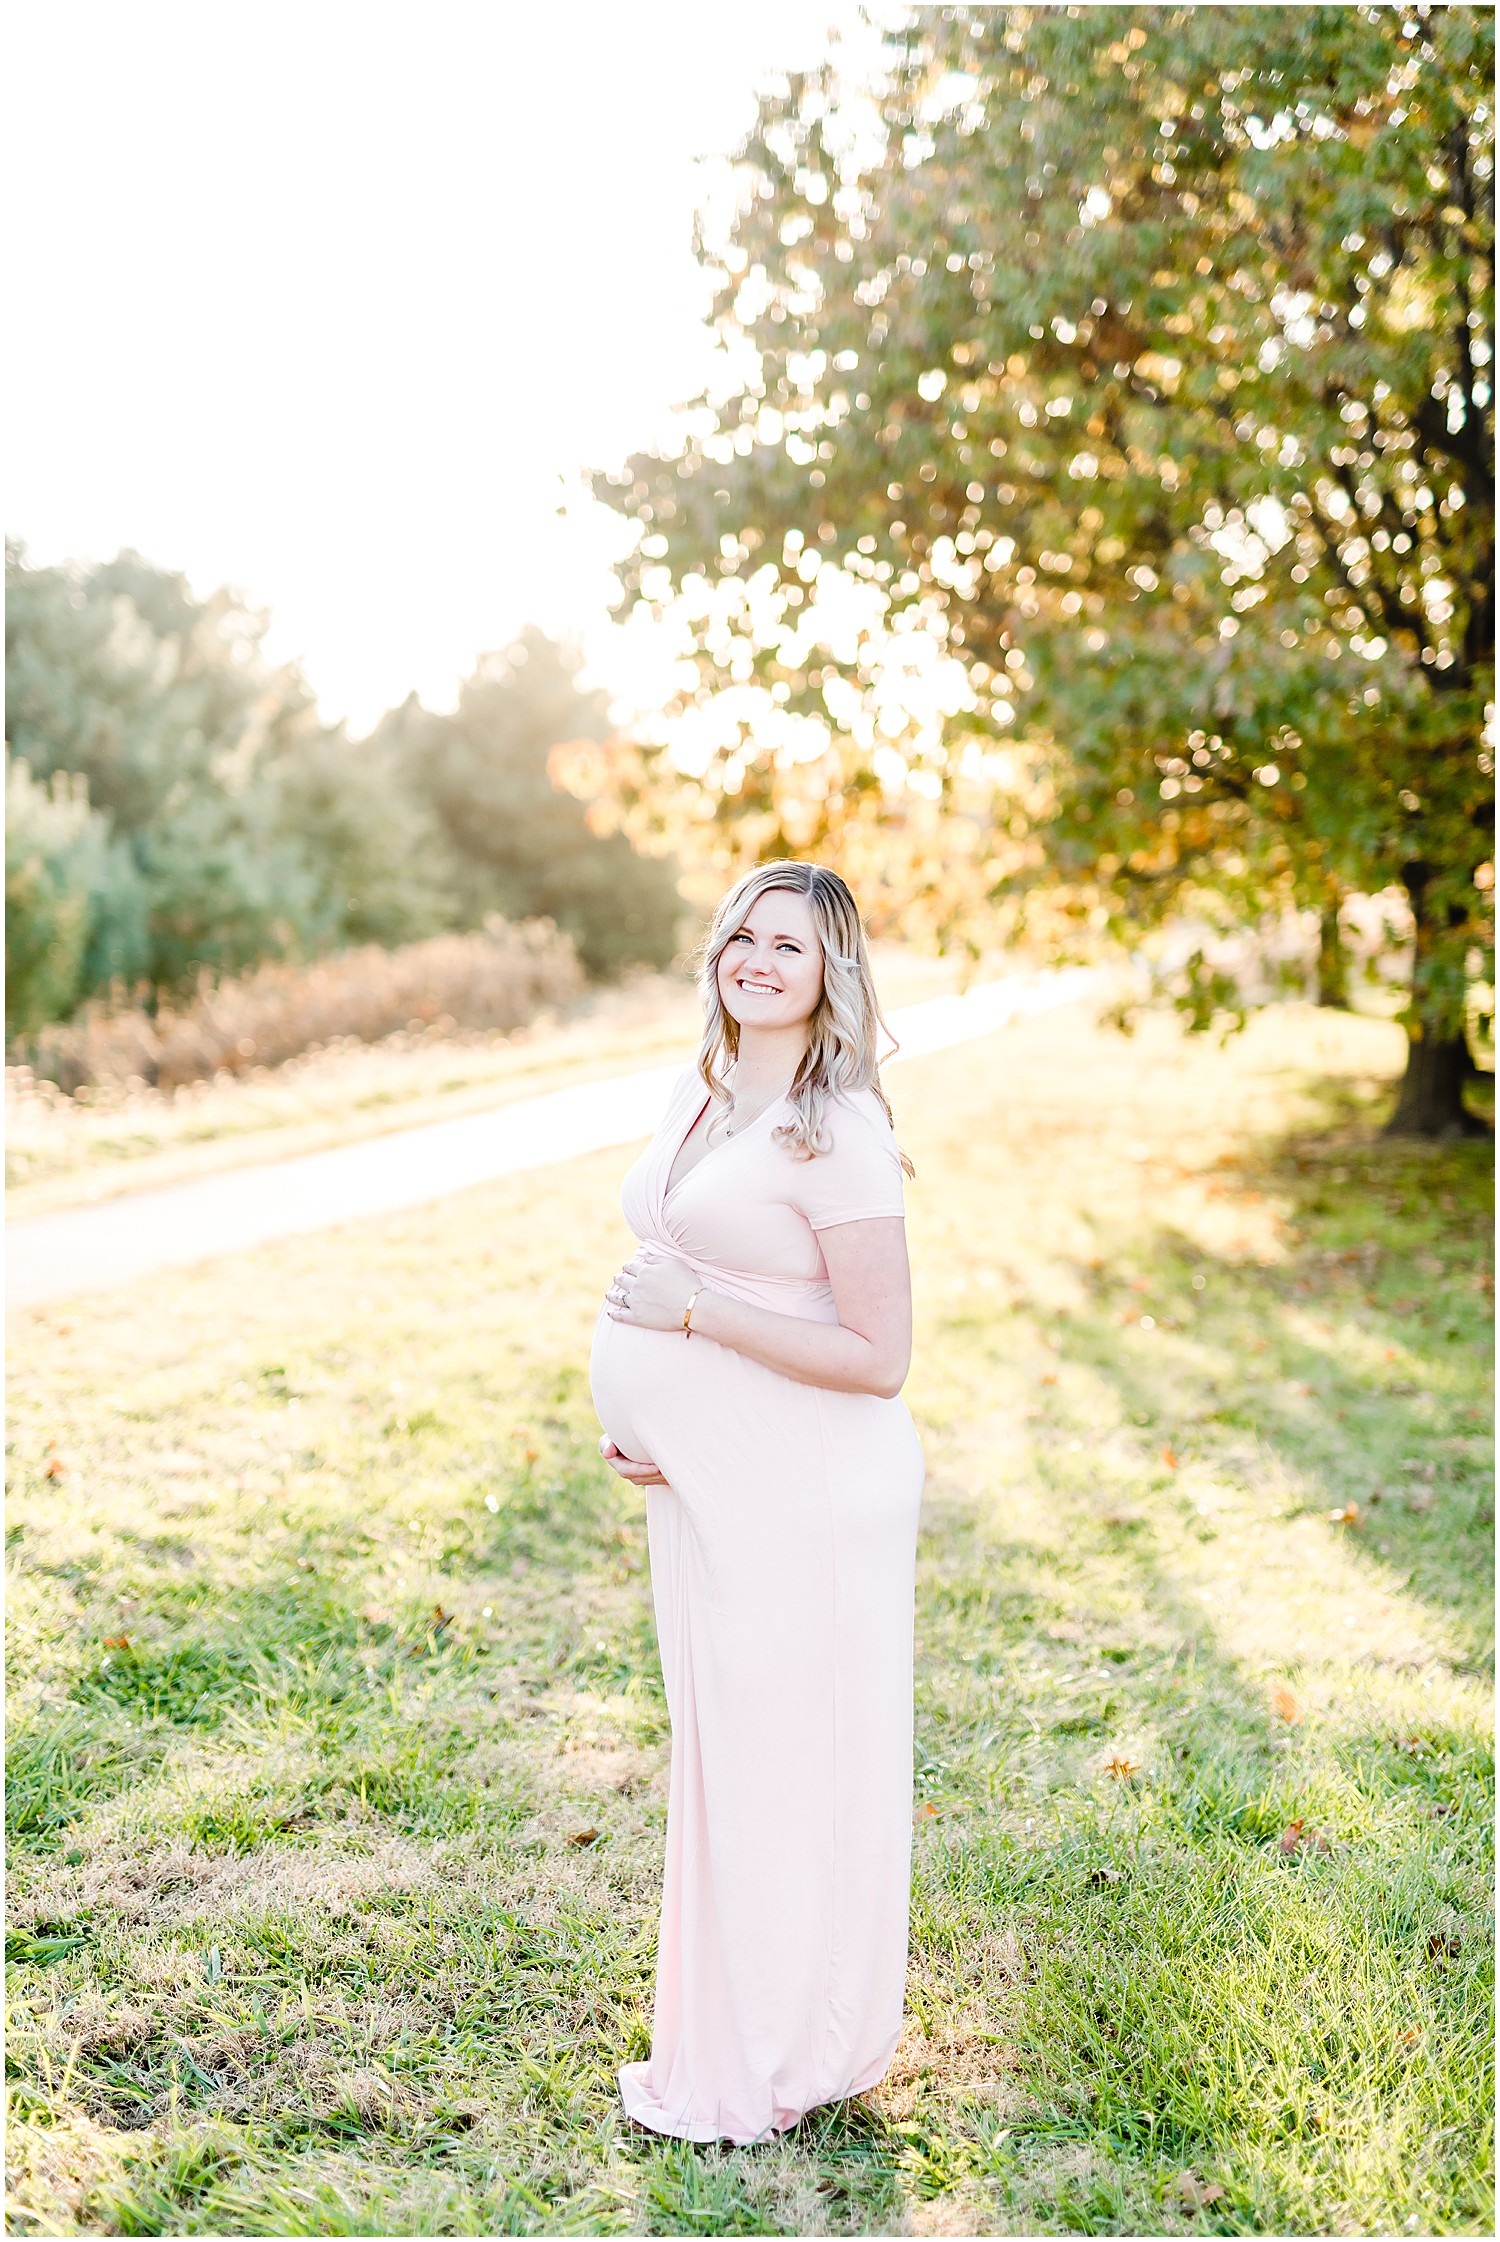 expecting mom standing in sunlight in front of tree long pink dress st Joseph mo maternity session